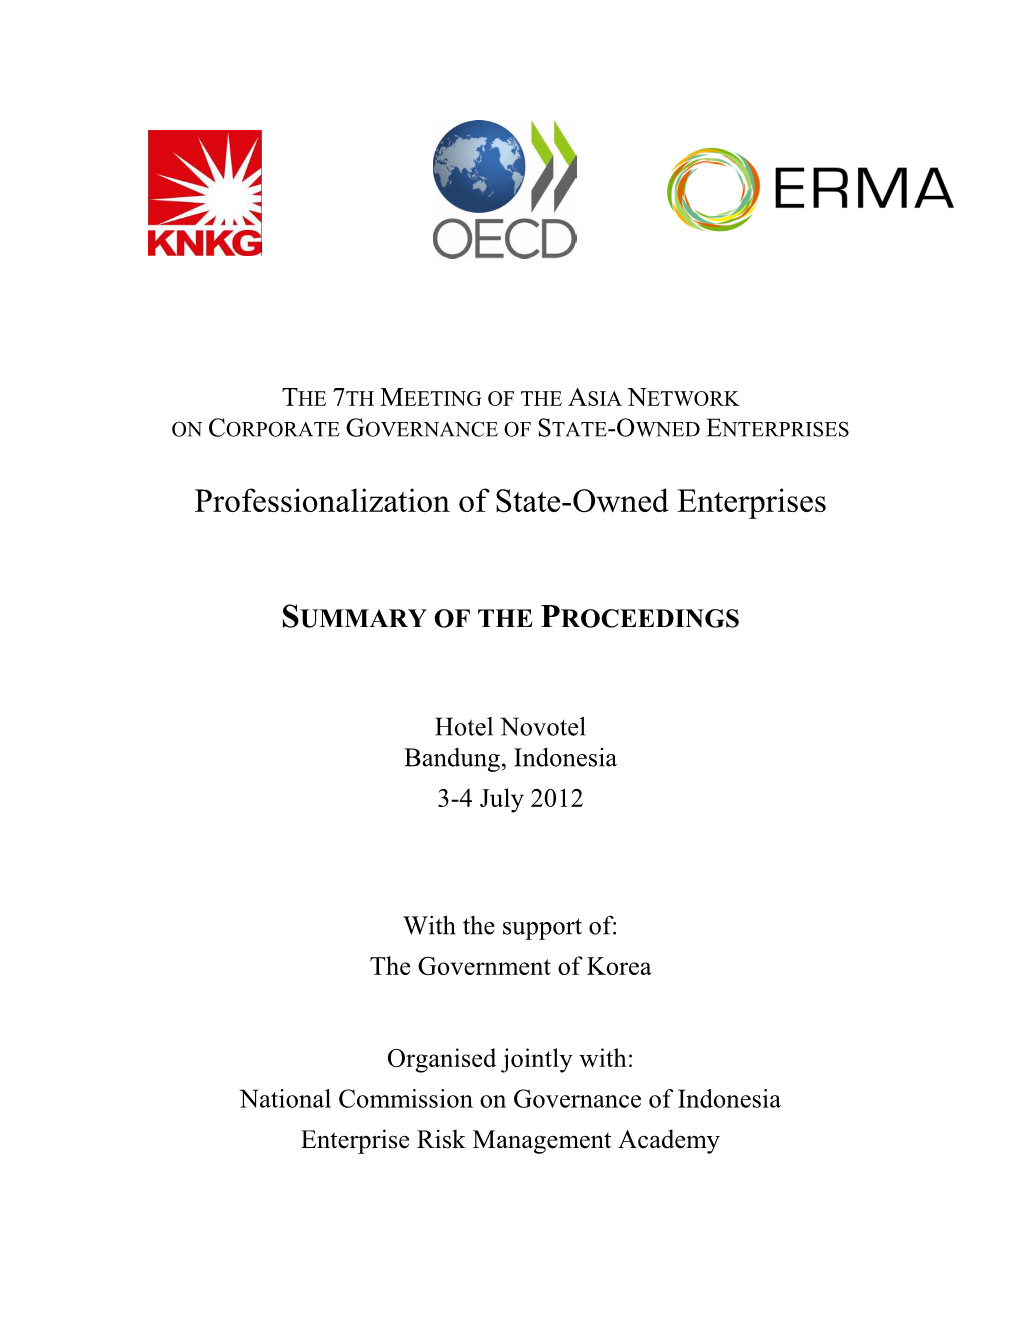 Professionalization of State-Owned Enterprises